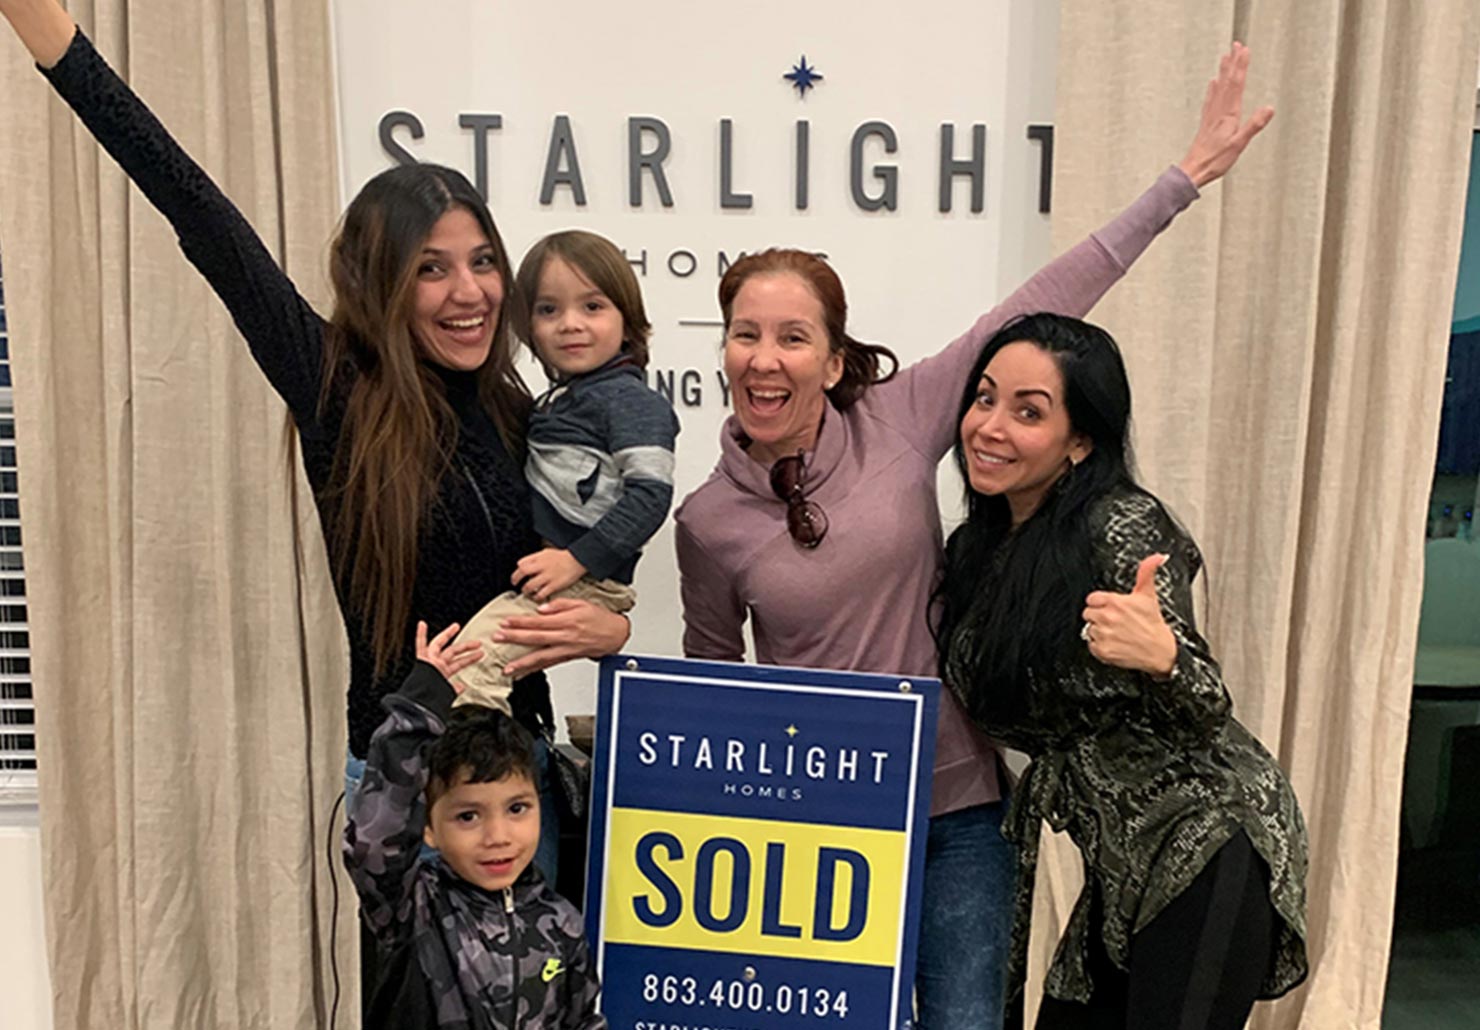 New Homes for Sale by Starlight Homes